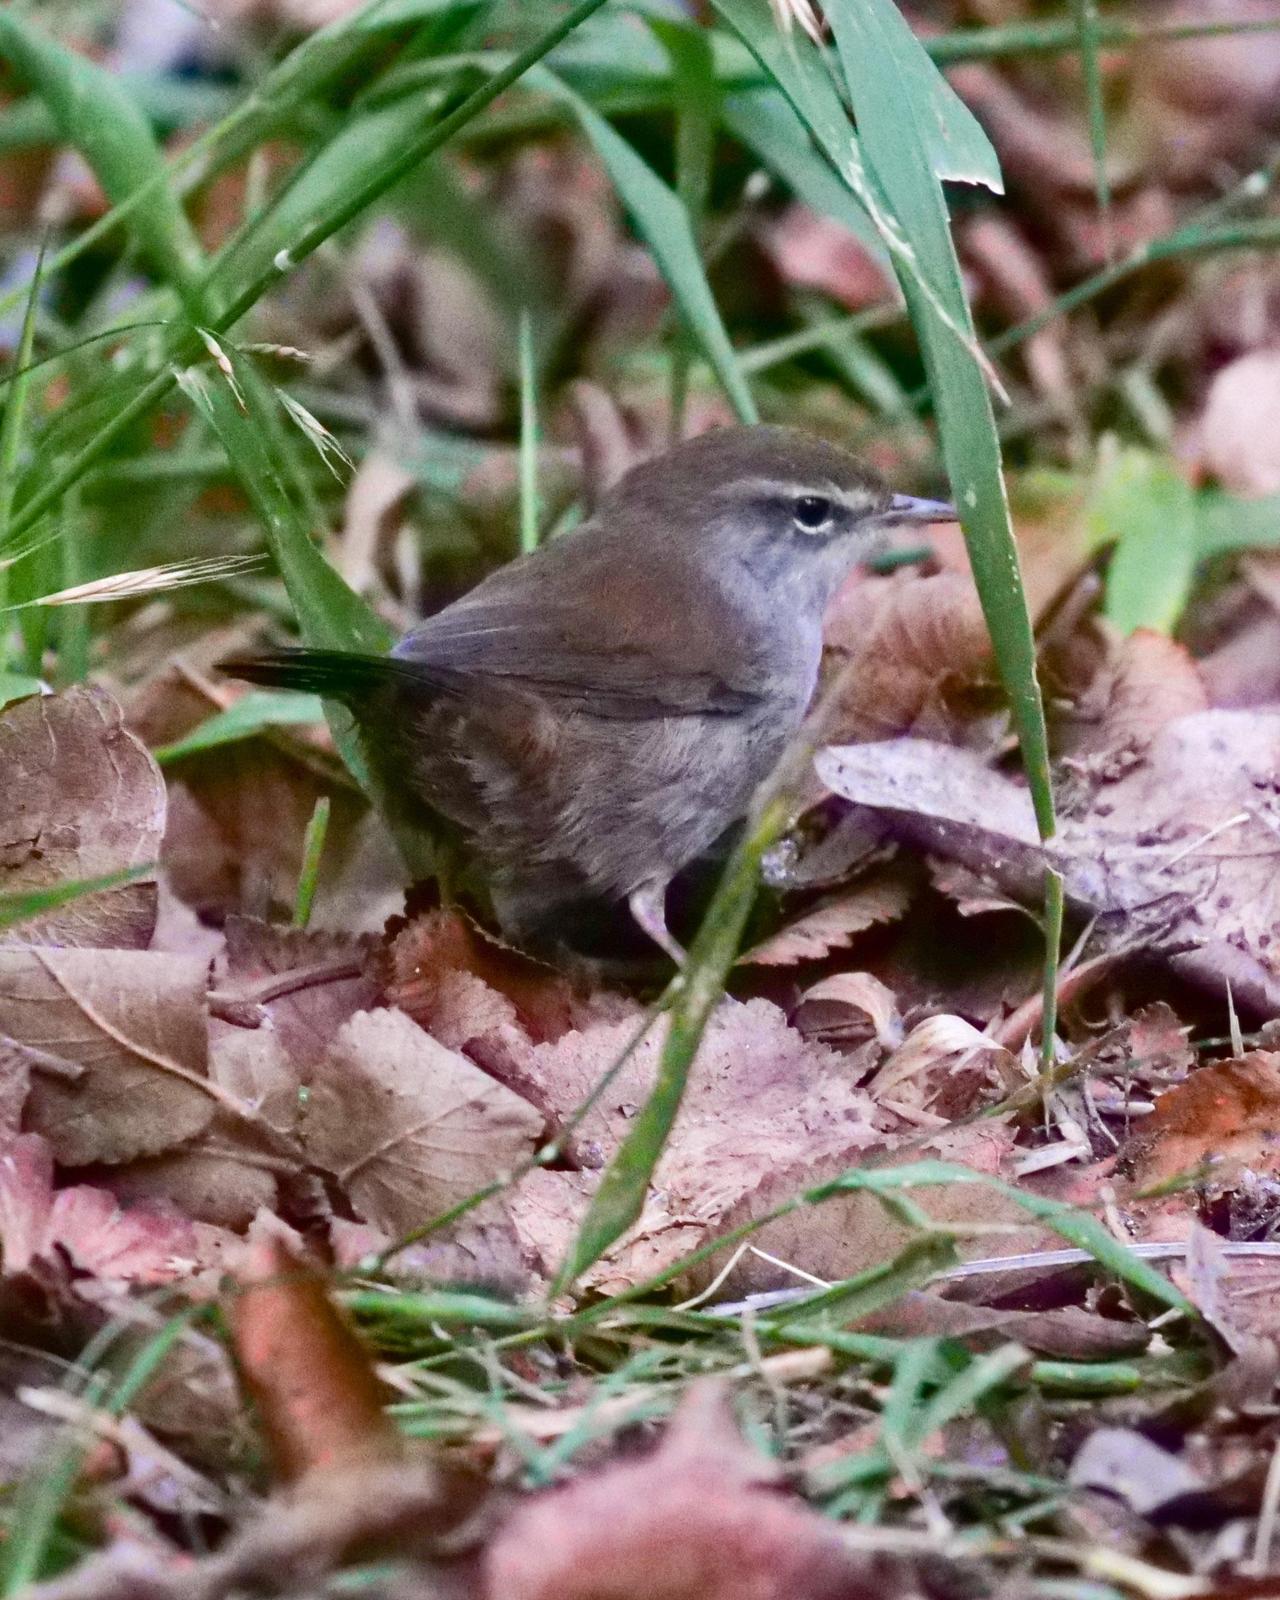 Cetti's Warbler Photo by Steve Percival